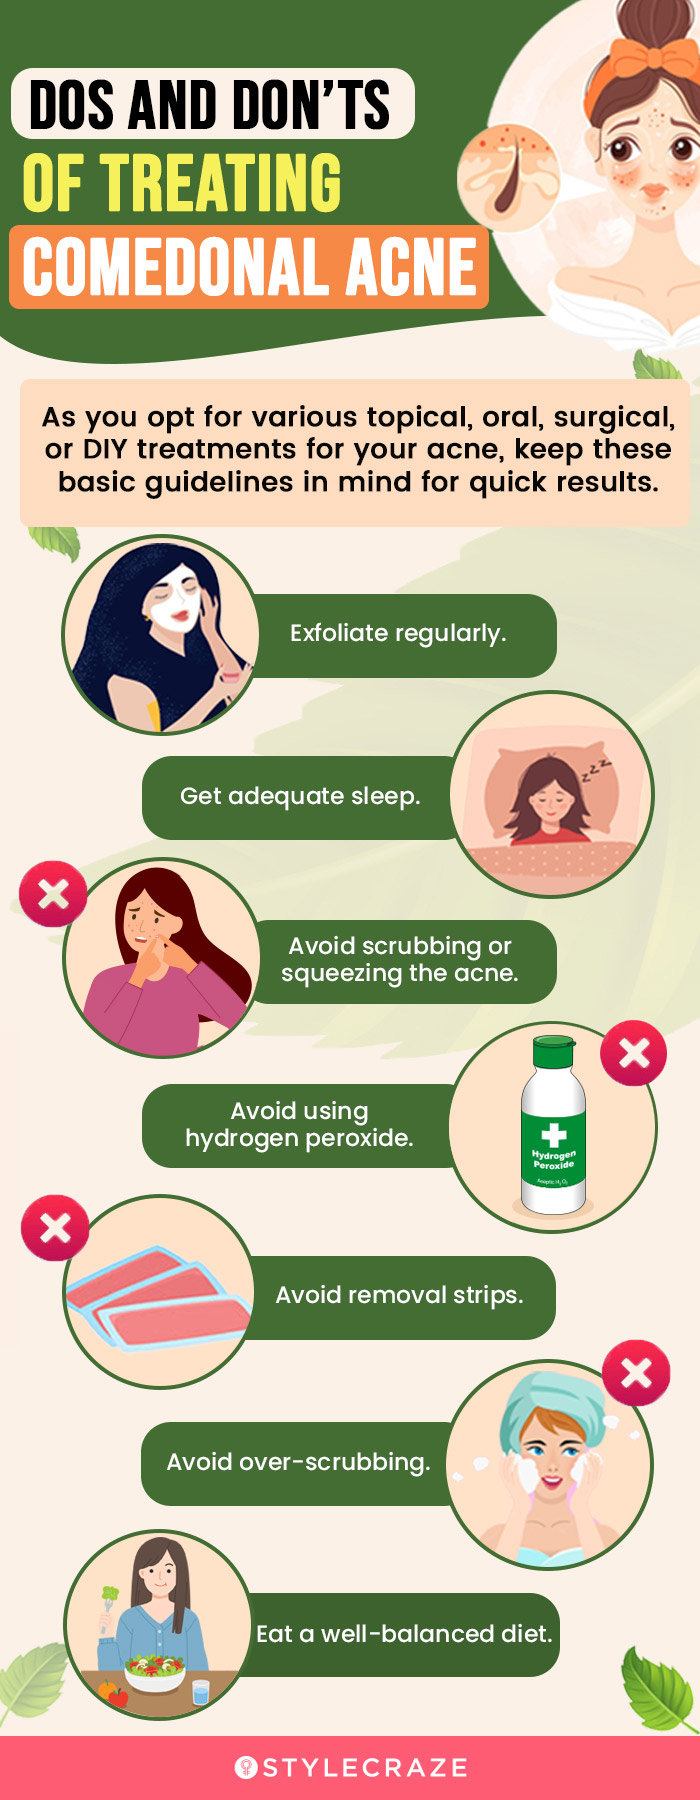 do and donts of treating comedonal acne [infographic]